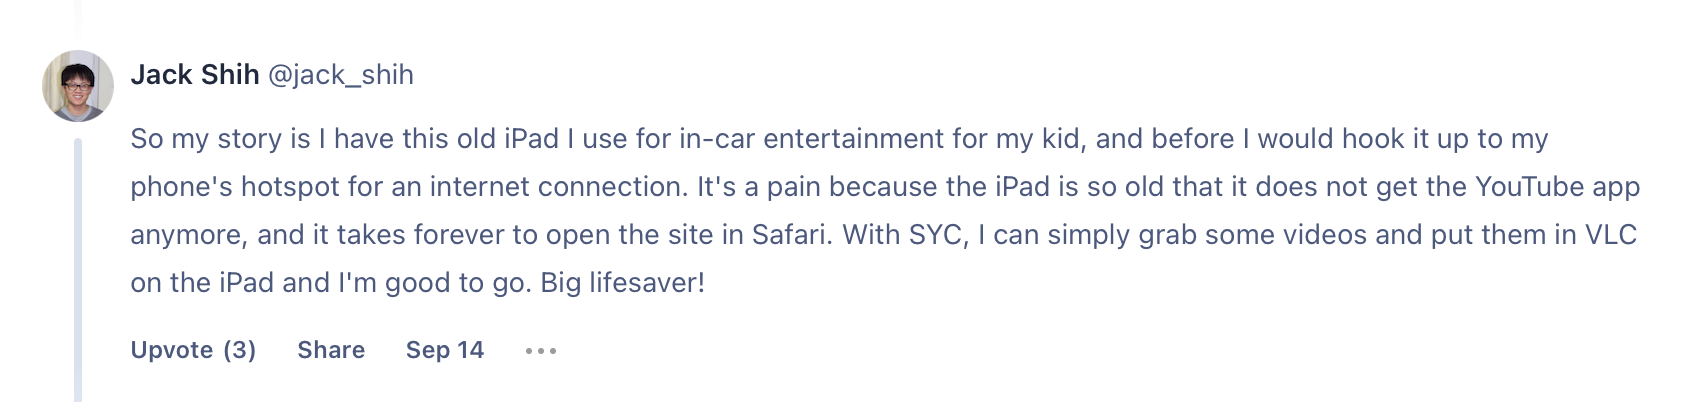 Here’s The Story Of One Syc Pro User We’ve Found In The Comments On Producthunt